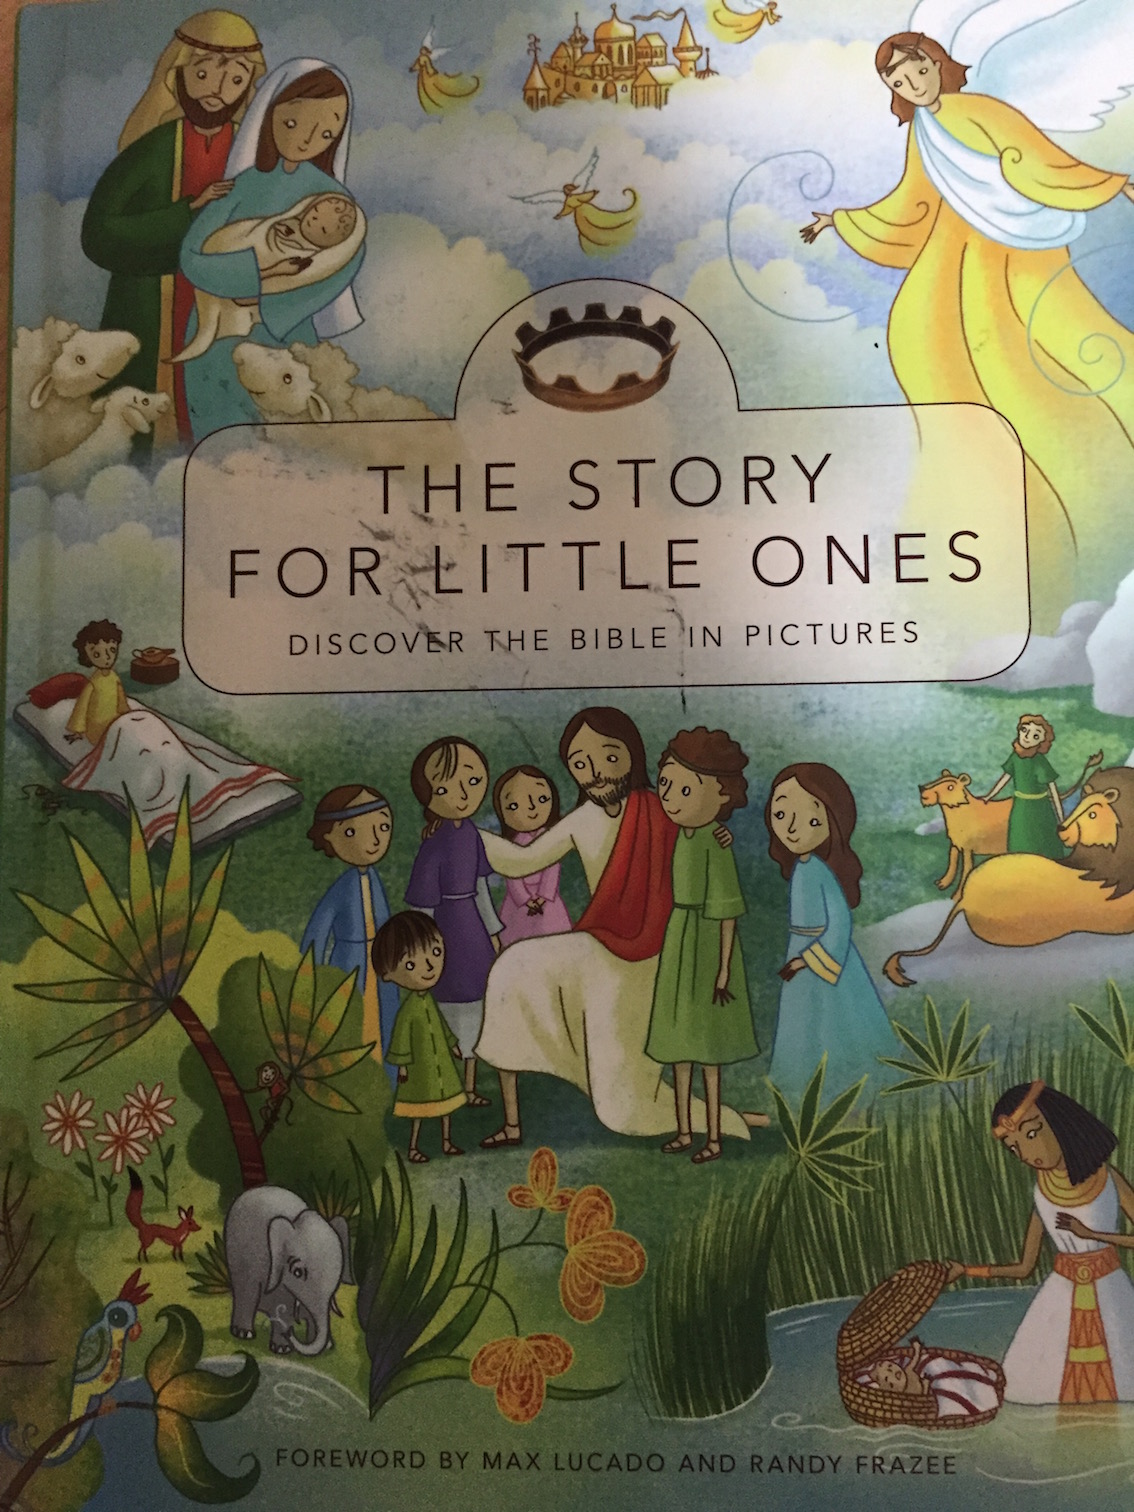 The Story for Little Ones